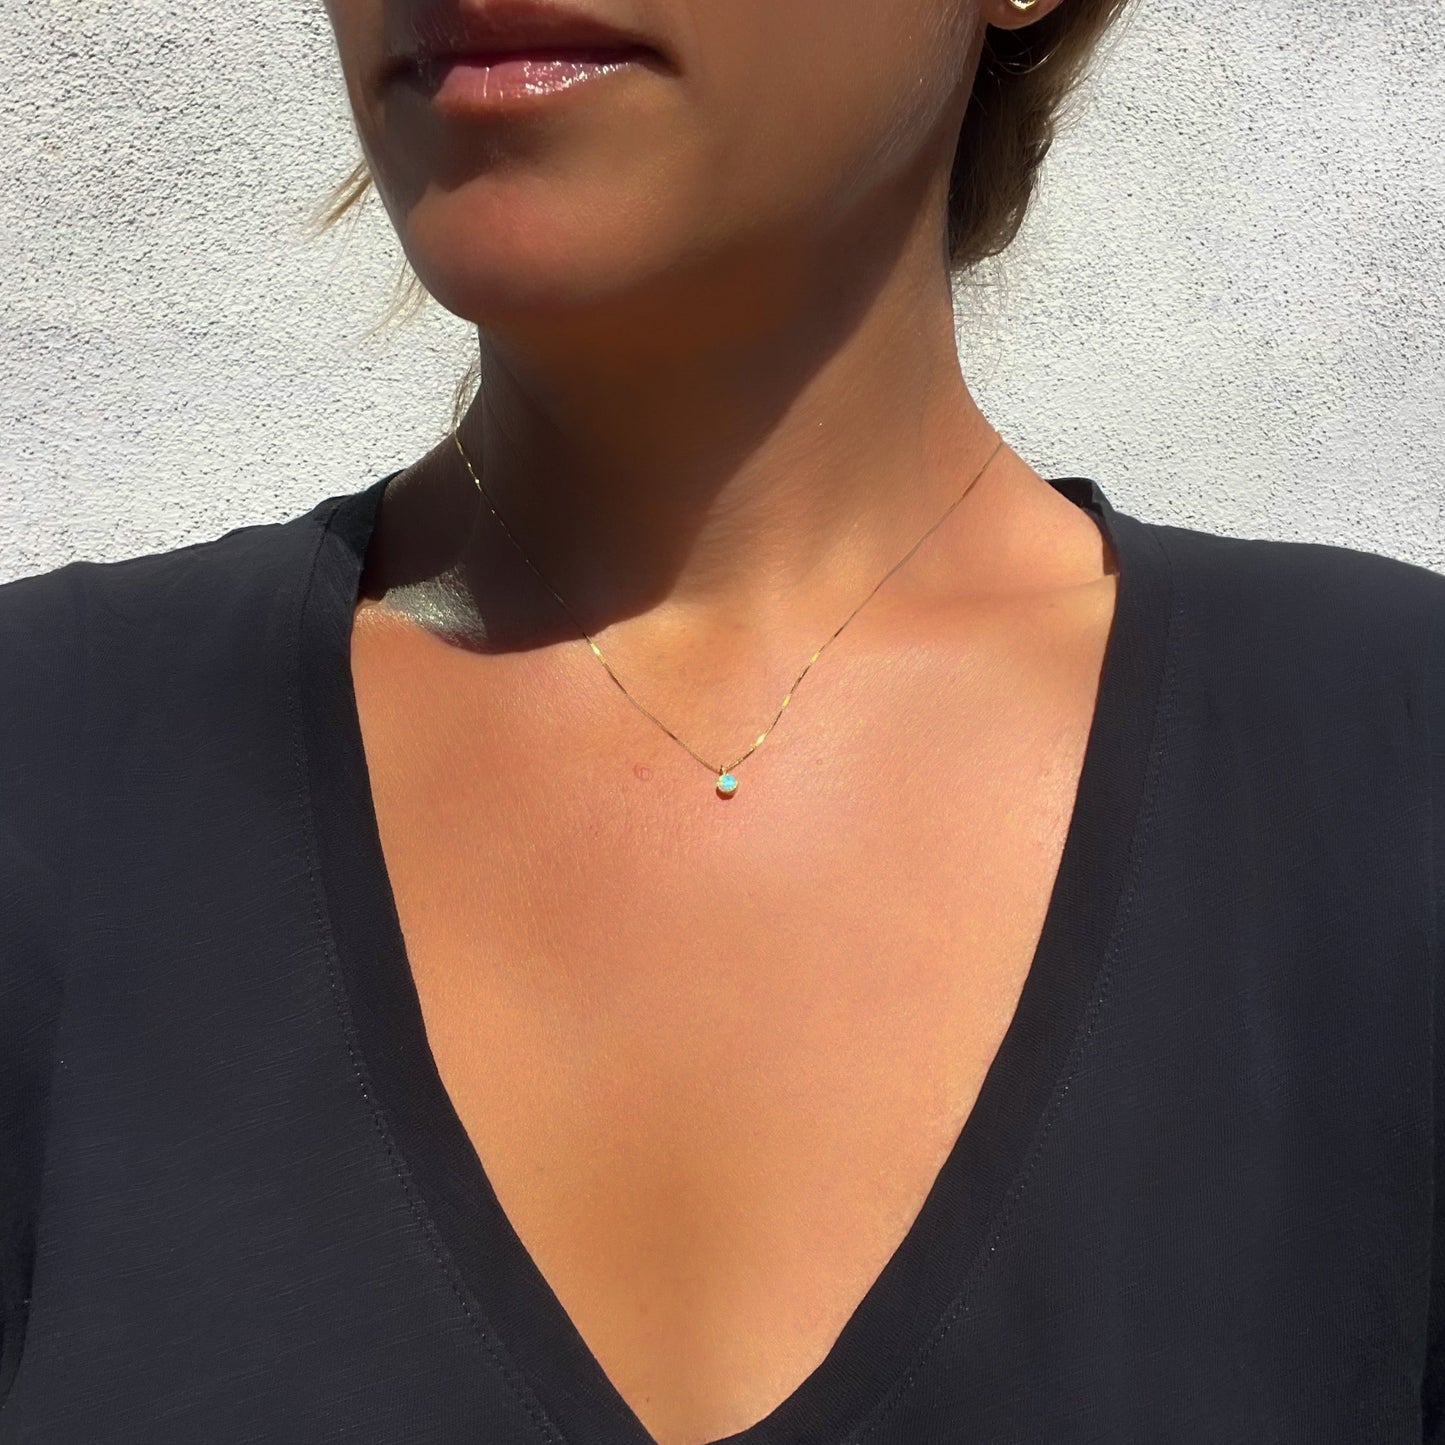 An Australian Opal Necklace by NIXIN Jewelry modeled on a woman. The Crystal Opal Necklace is made in yellow gold and is 16" long.